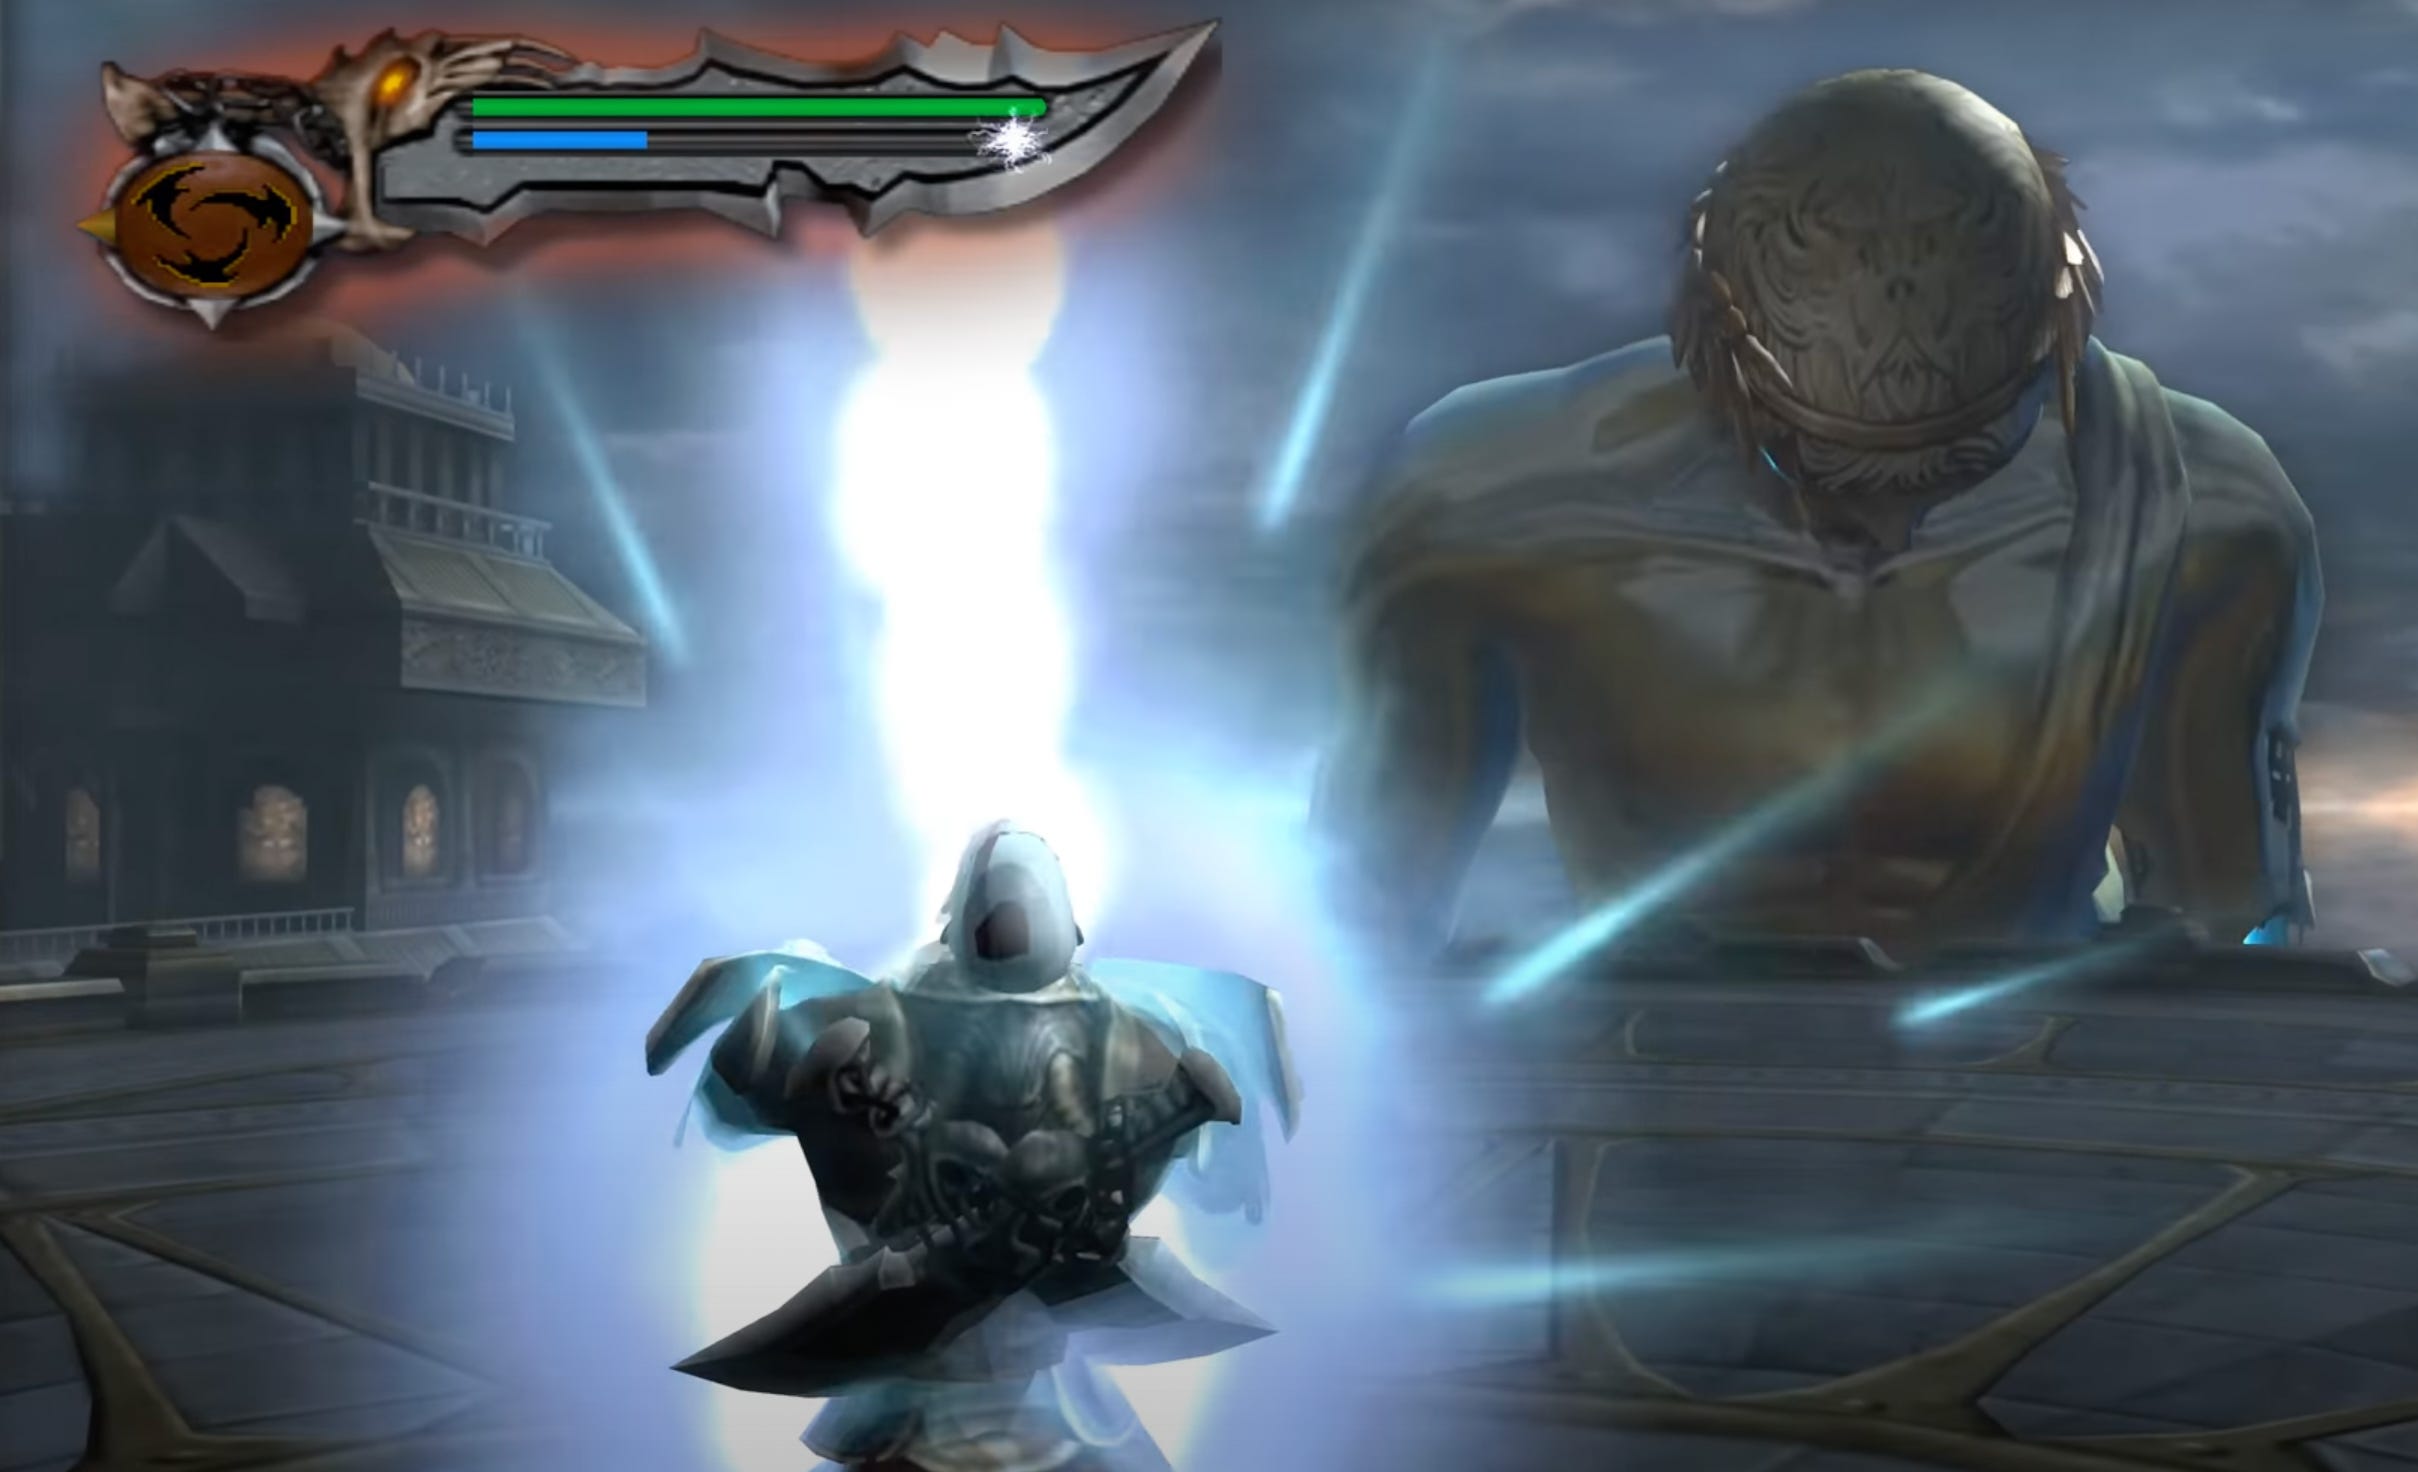 Why does Kratos have blue blades in God of War 2 at the beginning